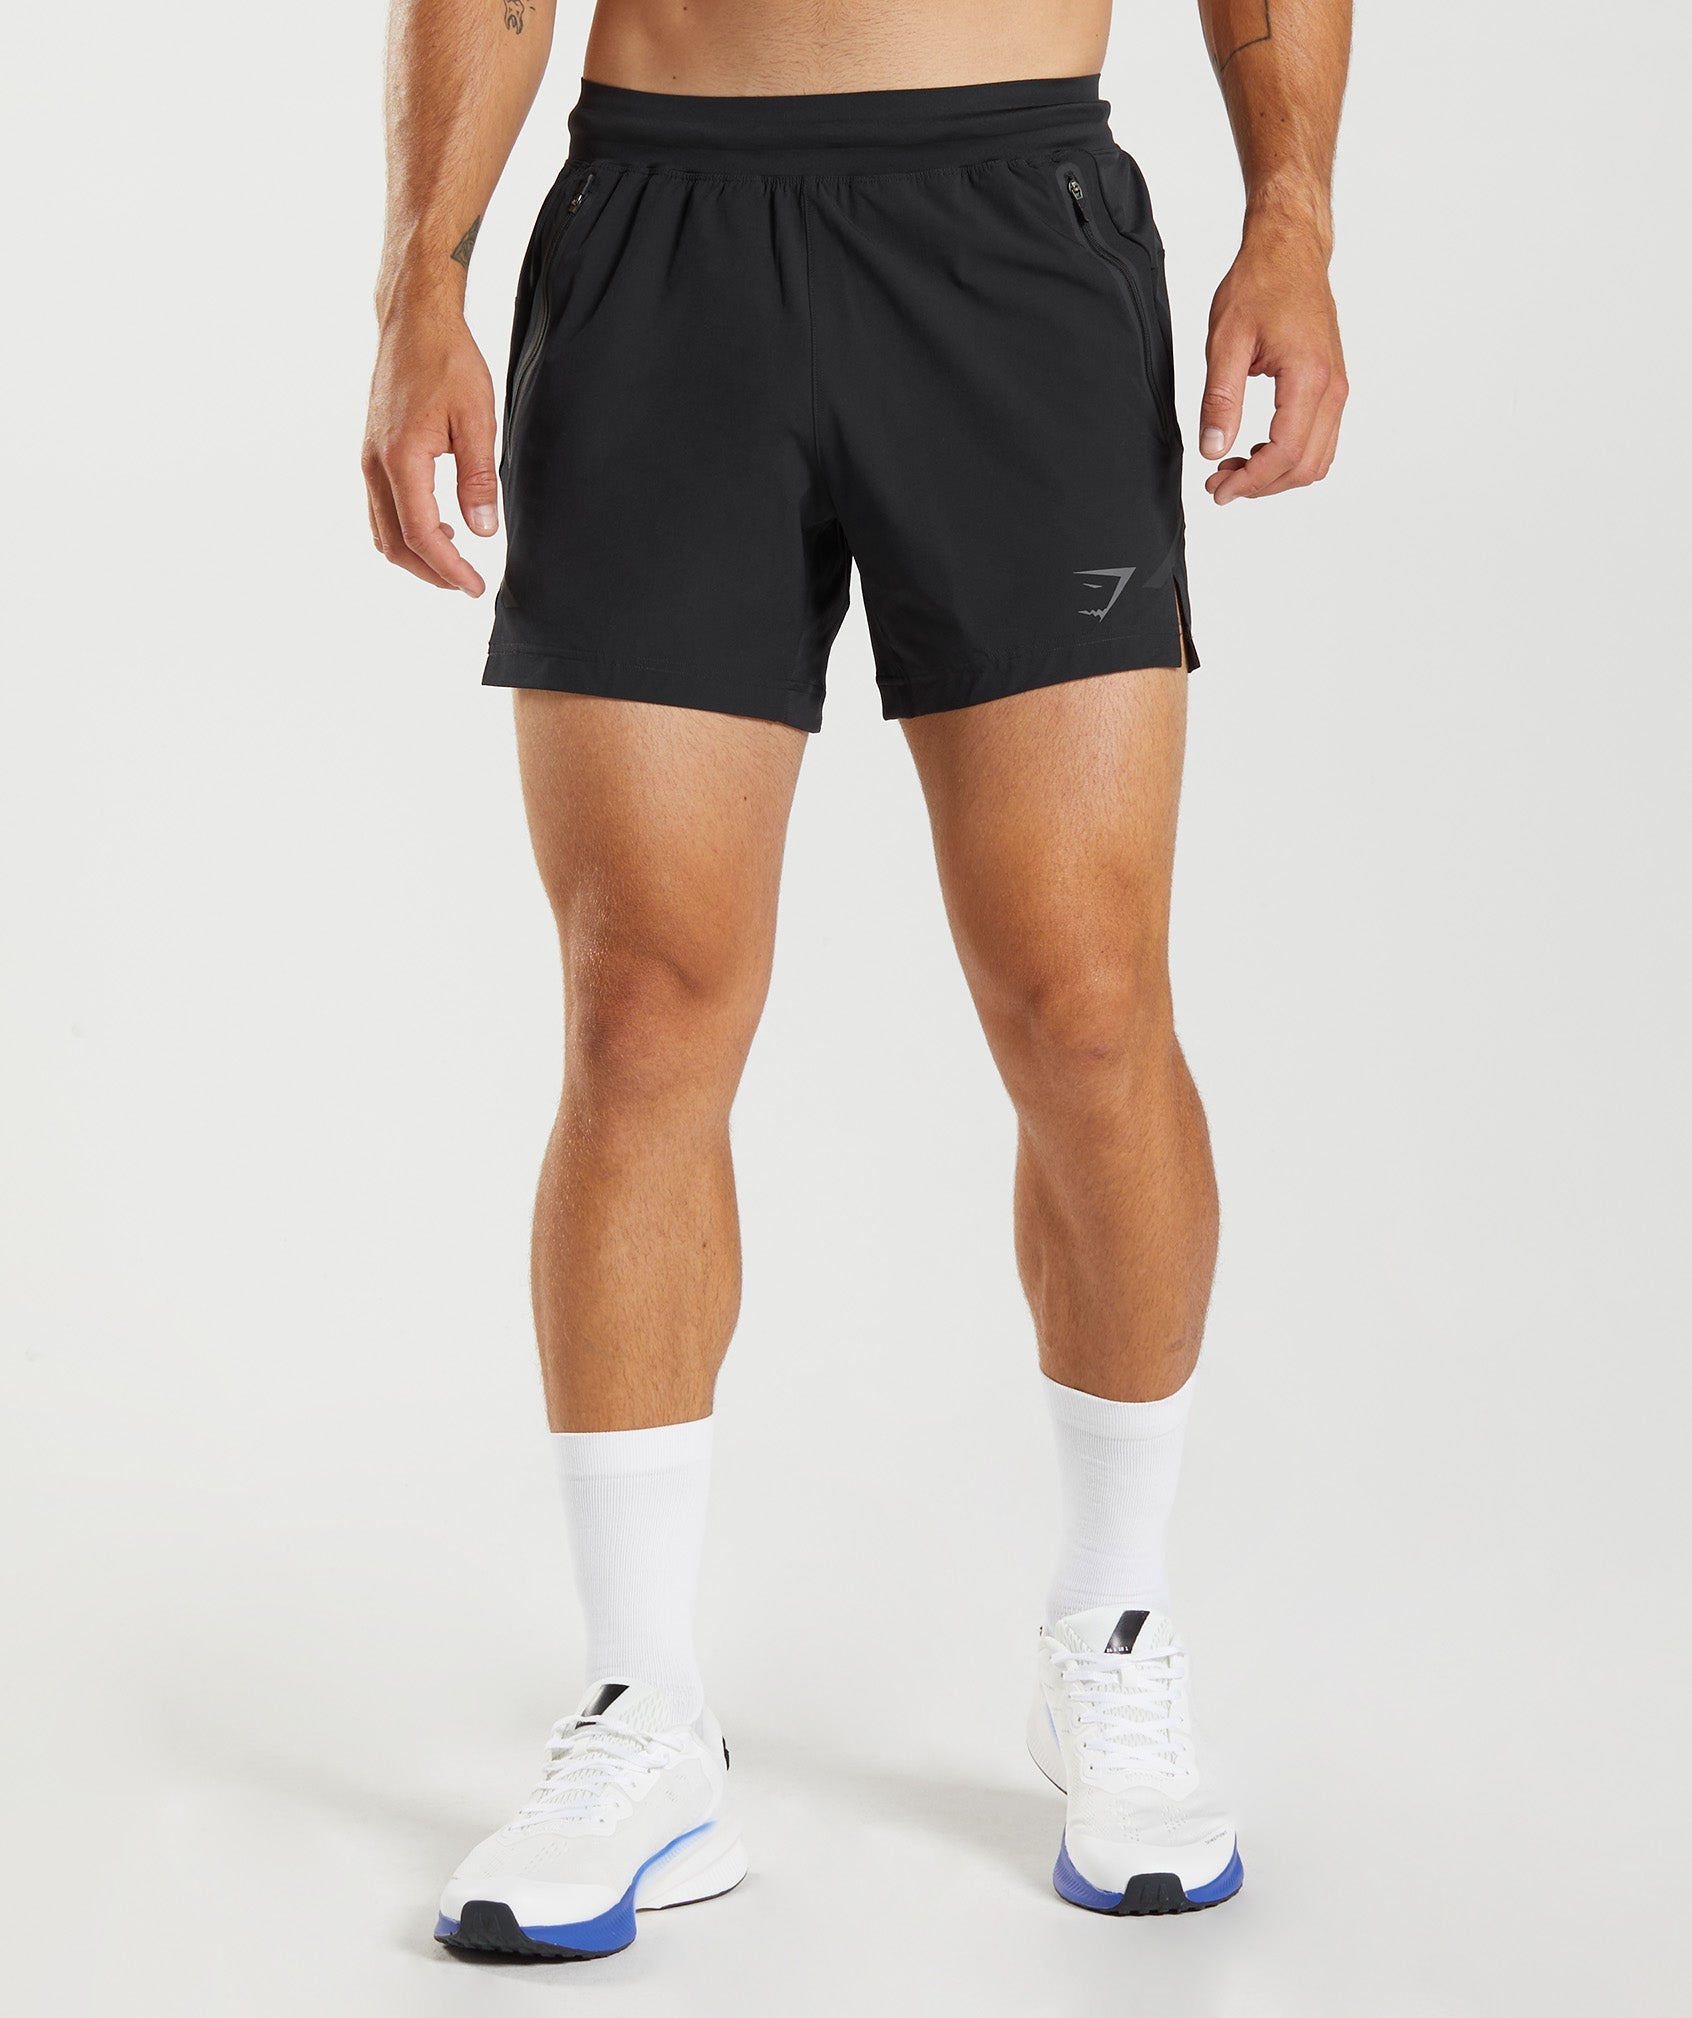 Apex 5" Perform Shorts in Black - view 1